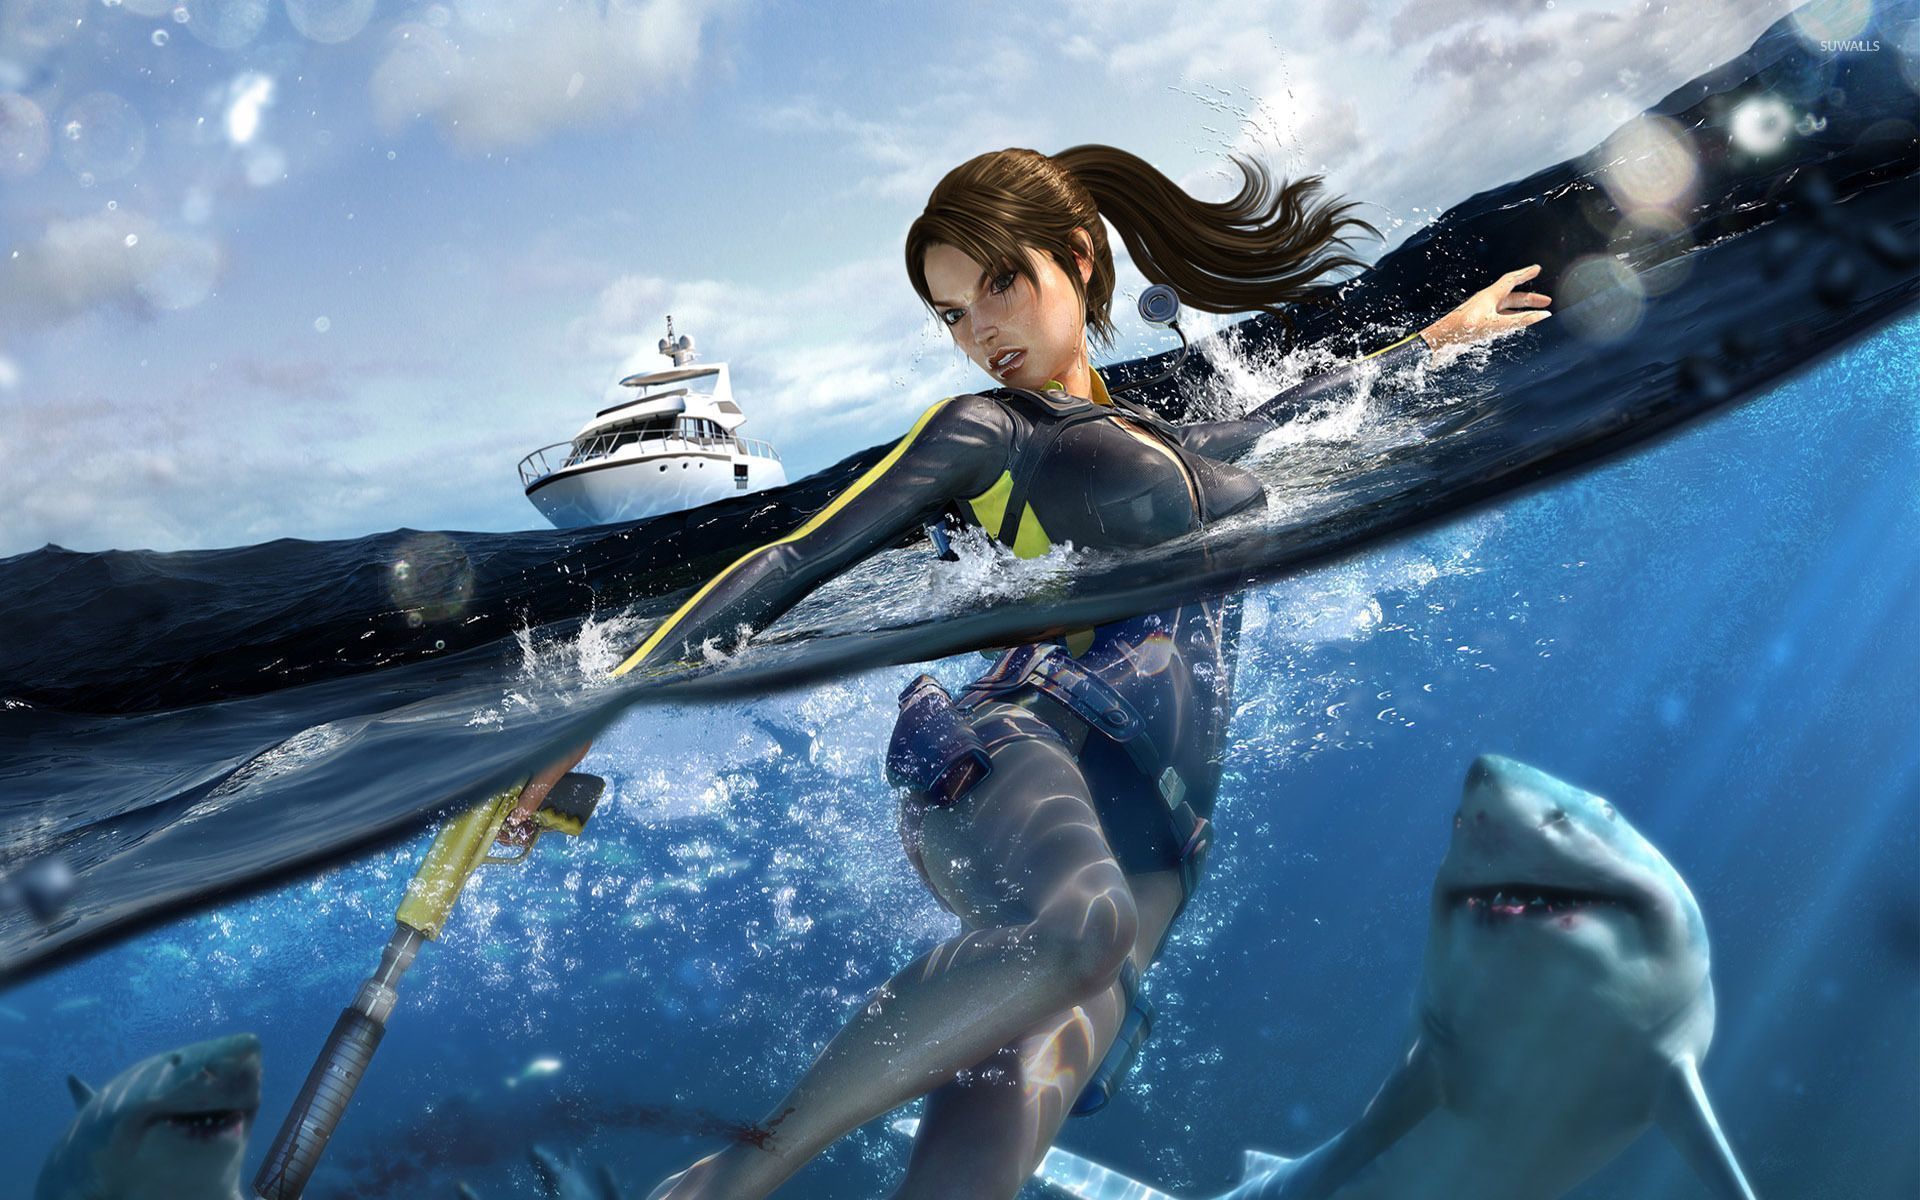 Lara Croft surrounded by sharks in Tomb Raider wallpaper